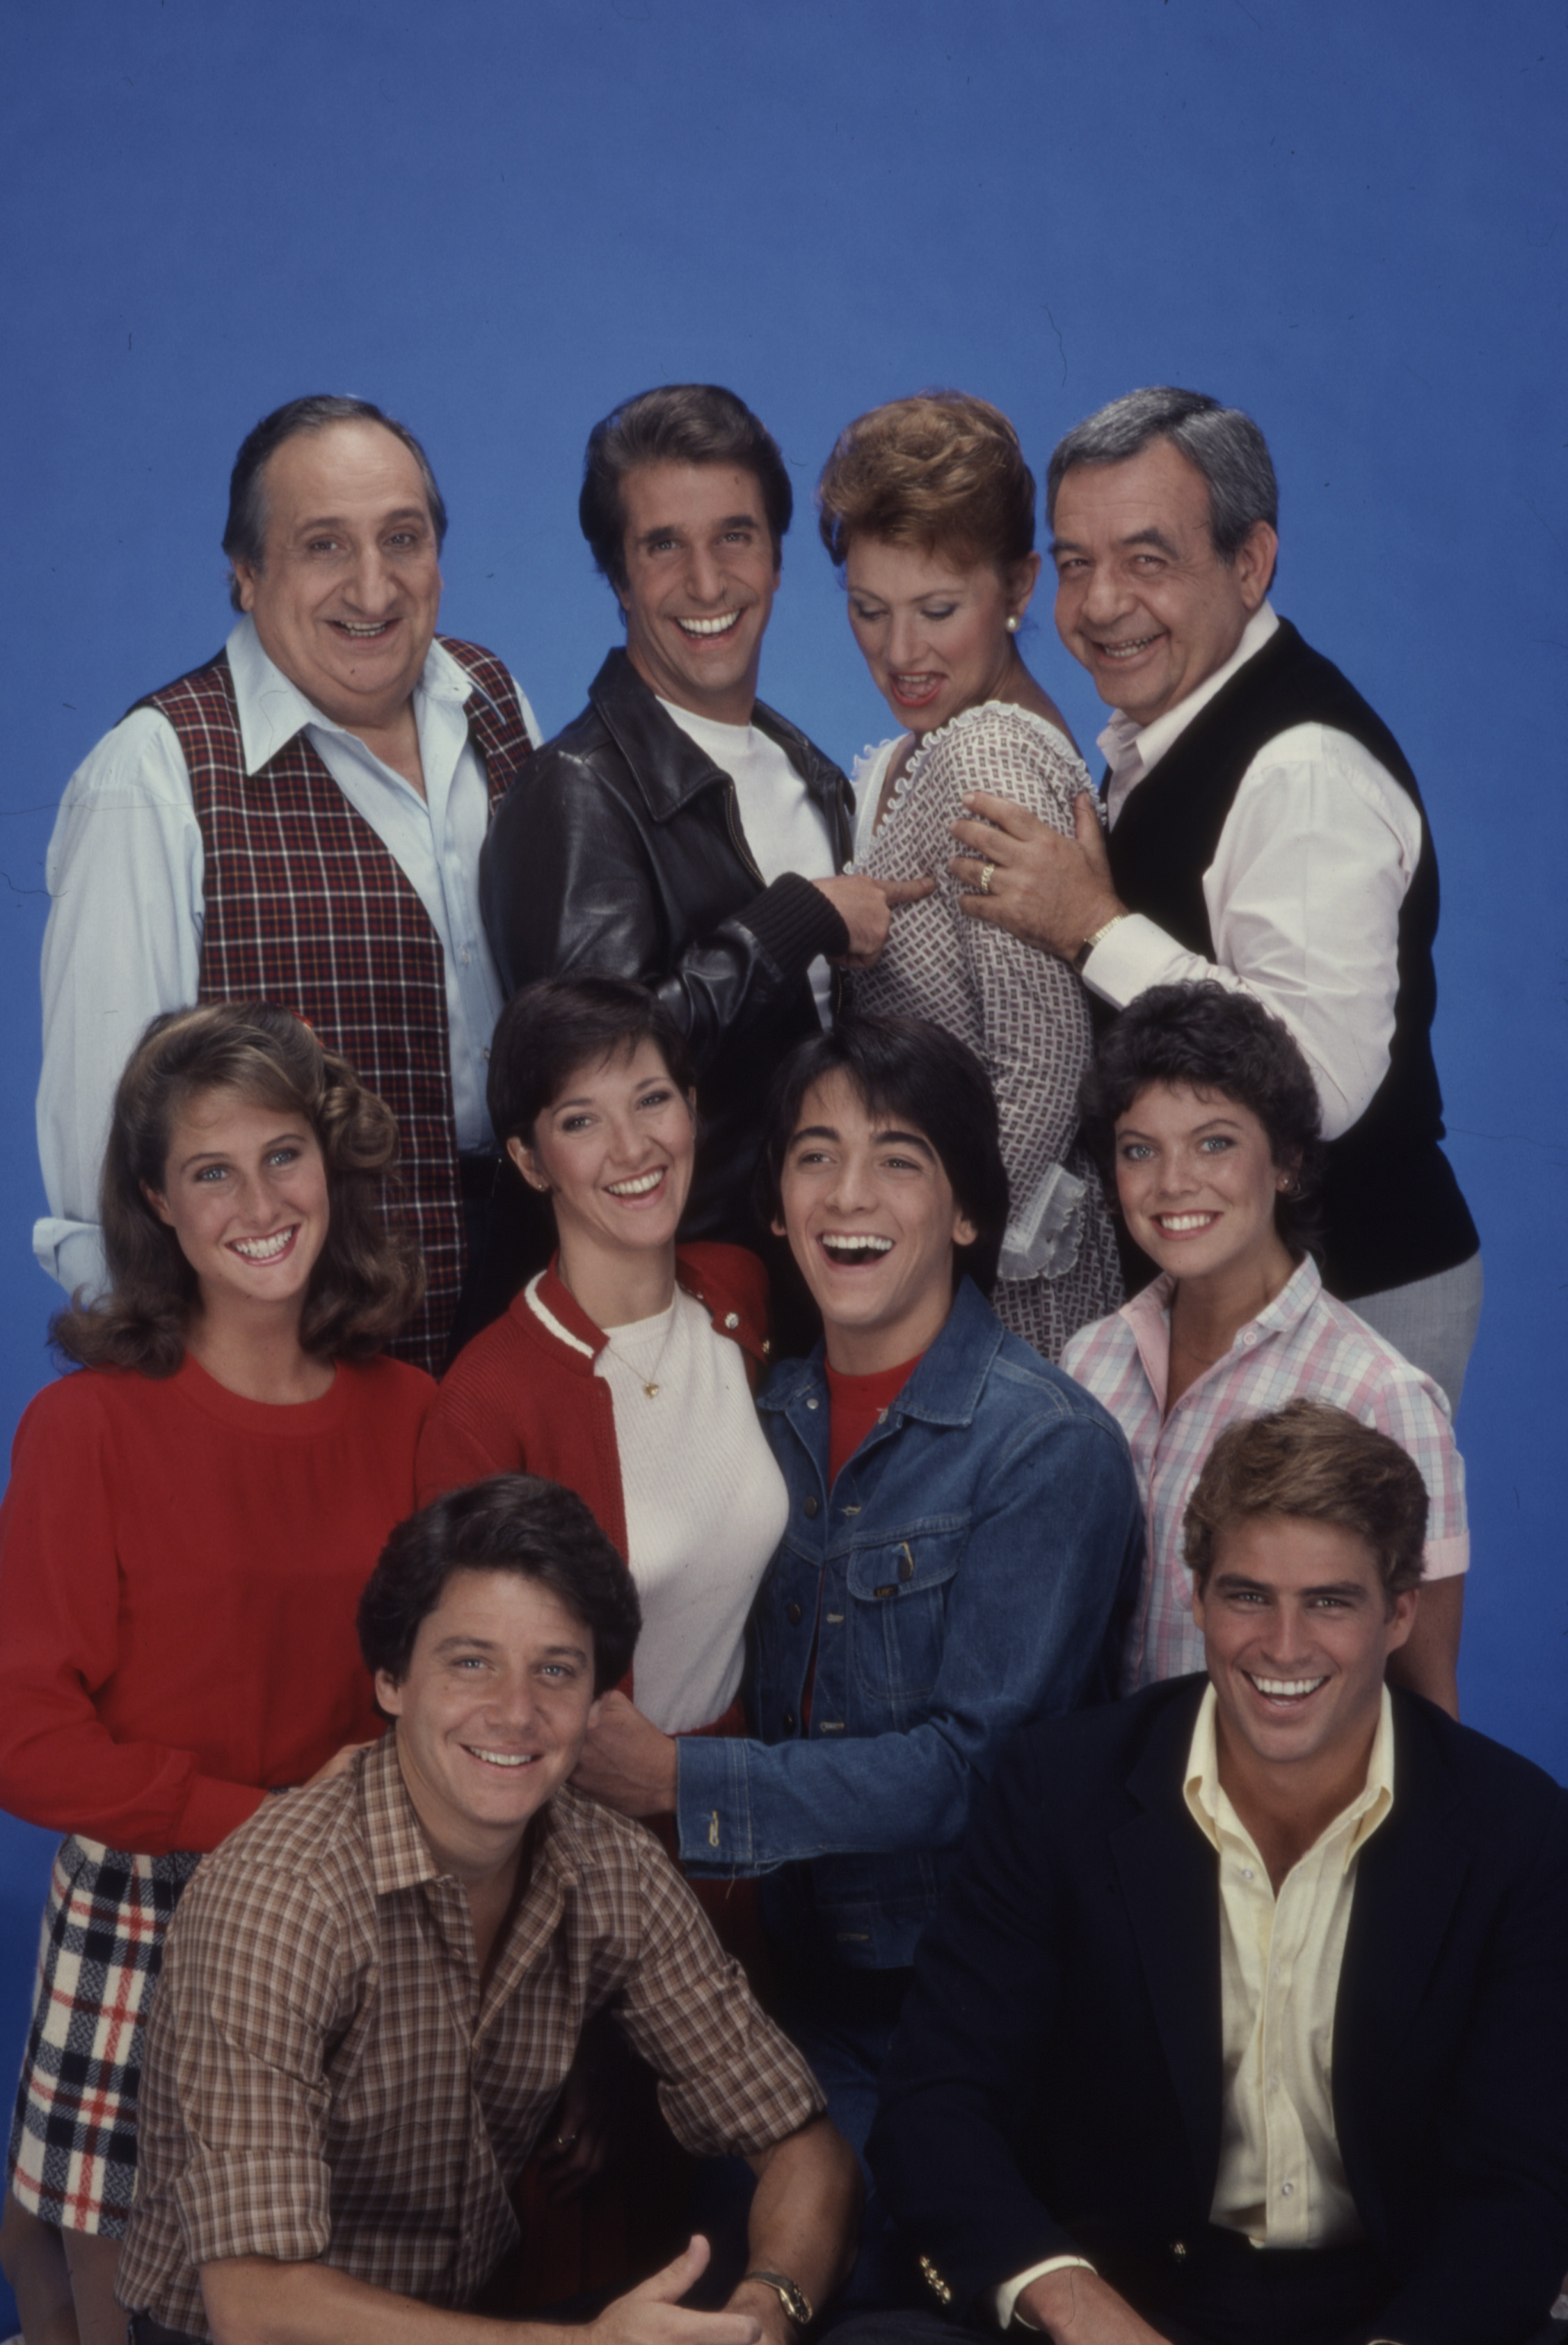 Al Molinaro, Henry Winkler, Marion Ross, Tom Bosley, Cathy Silvers, Lynda Goodfriend, Scott Baio, Erin Moran, Anson Williams, and Ted McGinley in a "Happy Days" promotional photo | Source: Getty Images